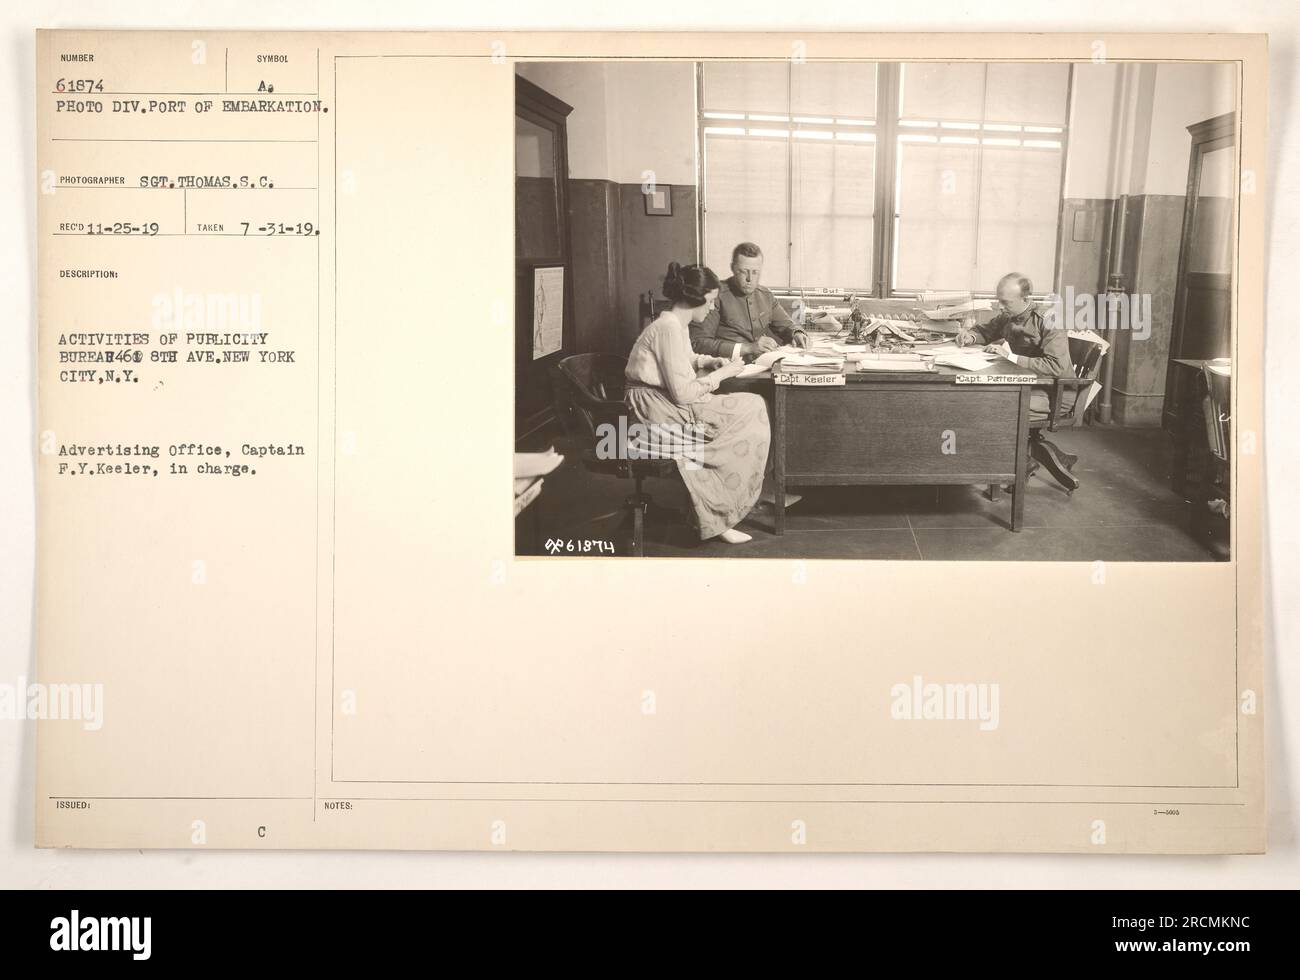 Captain F.Y. Keeler, the assistant advertising officer in charge of the Publicity Bureau in New York City, is seen in this photograph. The image depicts the activities of the bureau, which was responsible for advertising and promotional efforts during World War One. The photographer, Sgt. Thomas S.C. Peterson, took the photo on July 31, 1919. The image is part of the collection from the Port of Embarkation and is labeled with the identification number 61874. Stock Photo